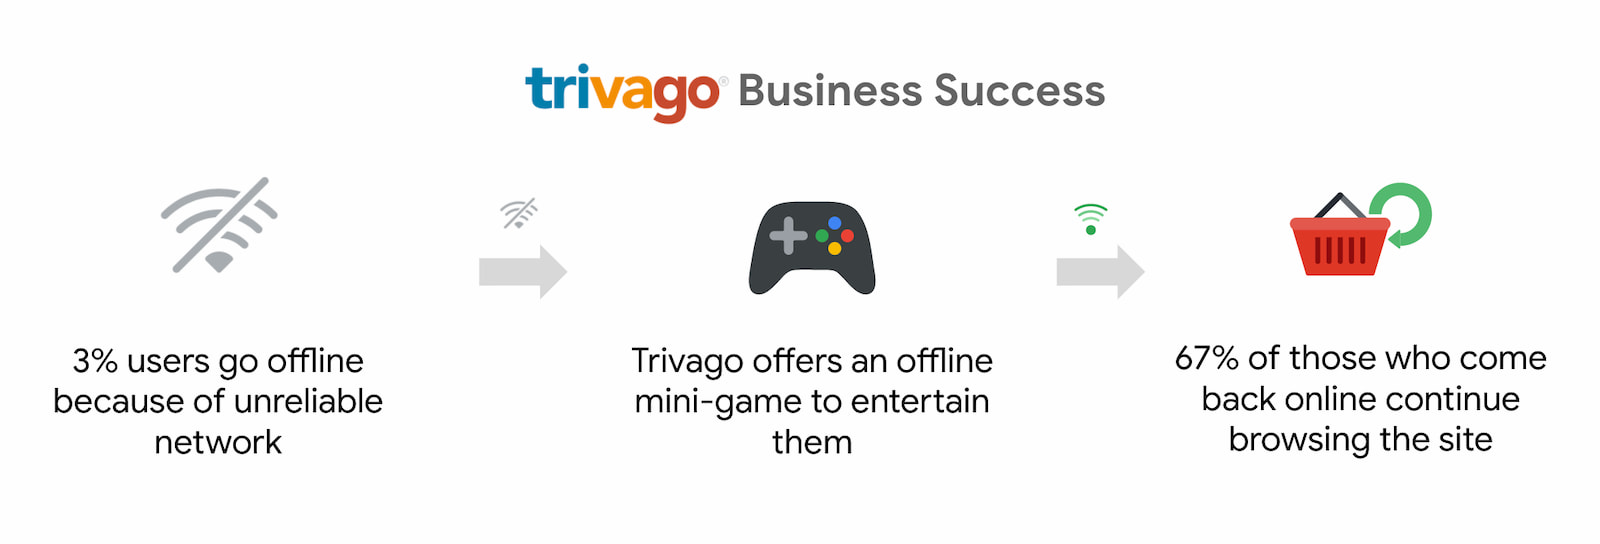 Trivago saw a 67% increase in users who came back online and continue browsing.